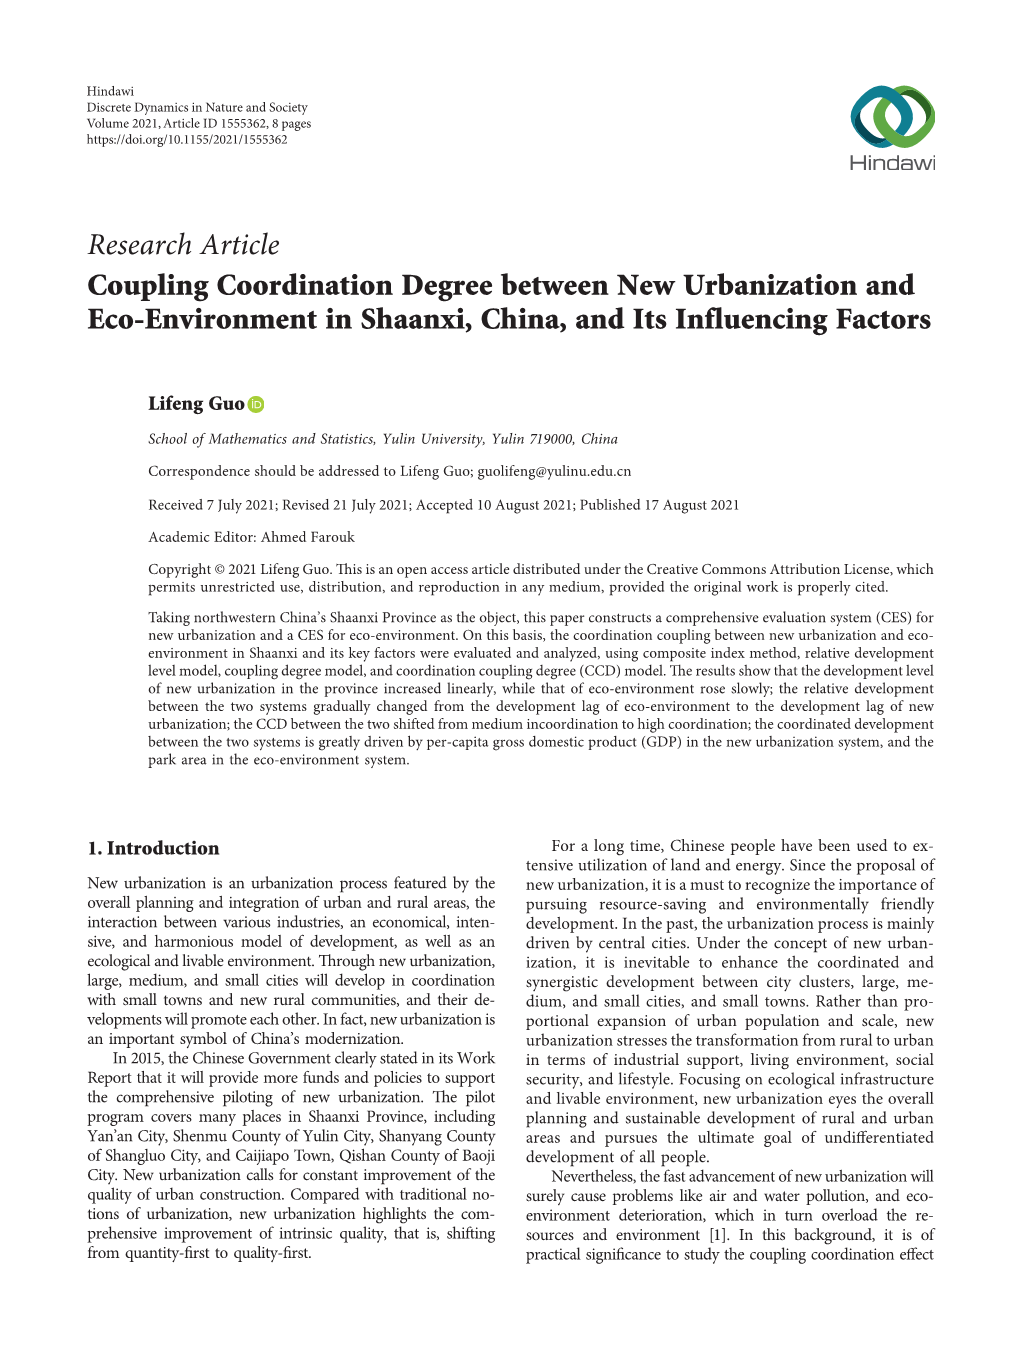 Coupling Coordination Degree Between New Urbanization and Eco-Environment in Shaanxi, China, and Its Influencing Factors